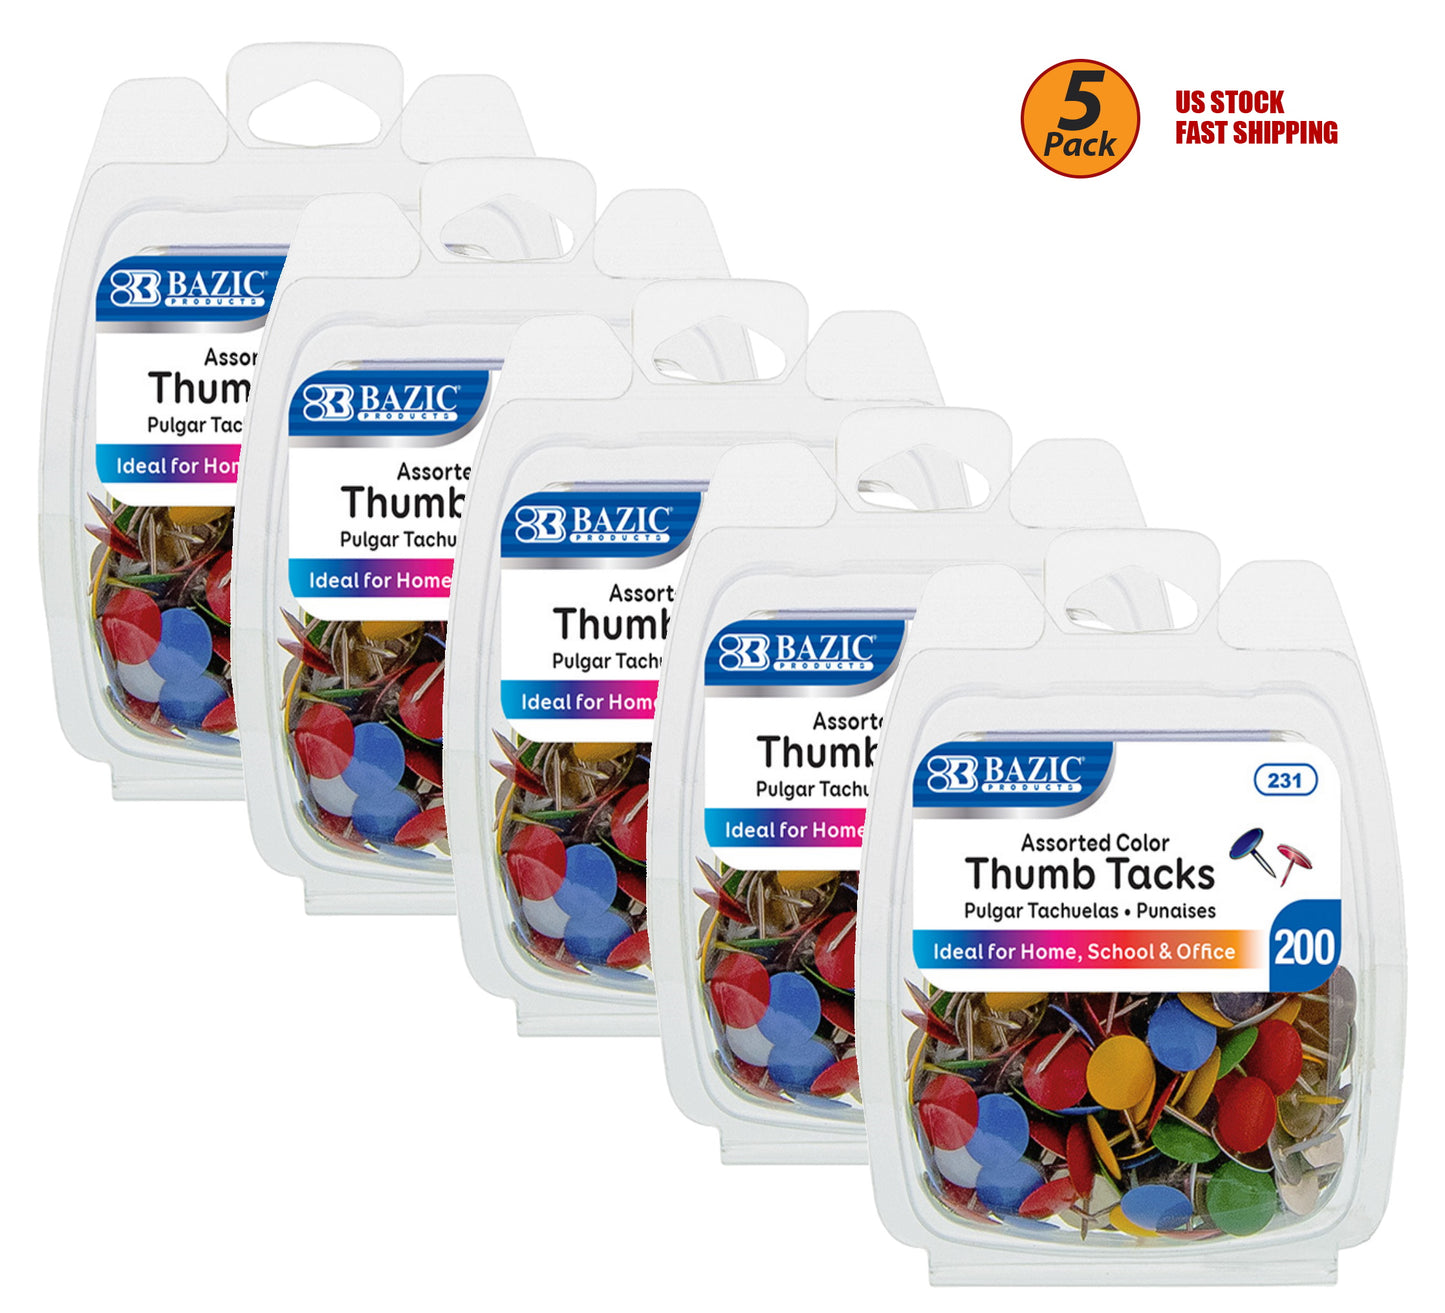 1000 Assorted Colored Thumb Tacks, Multi-Color Thumb Tacks - Smooth solid heads insure safety and comfort